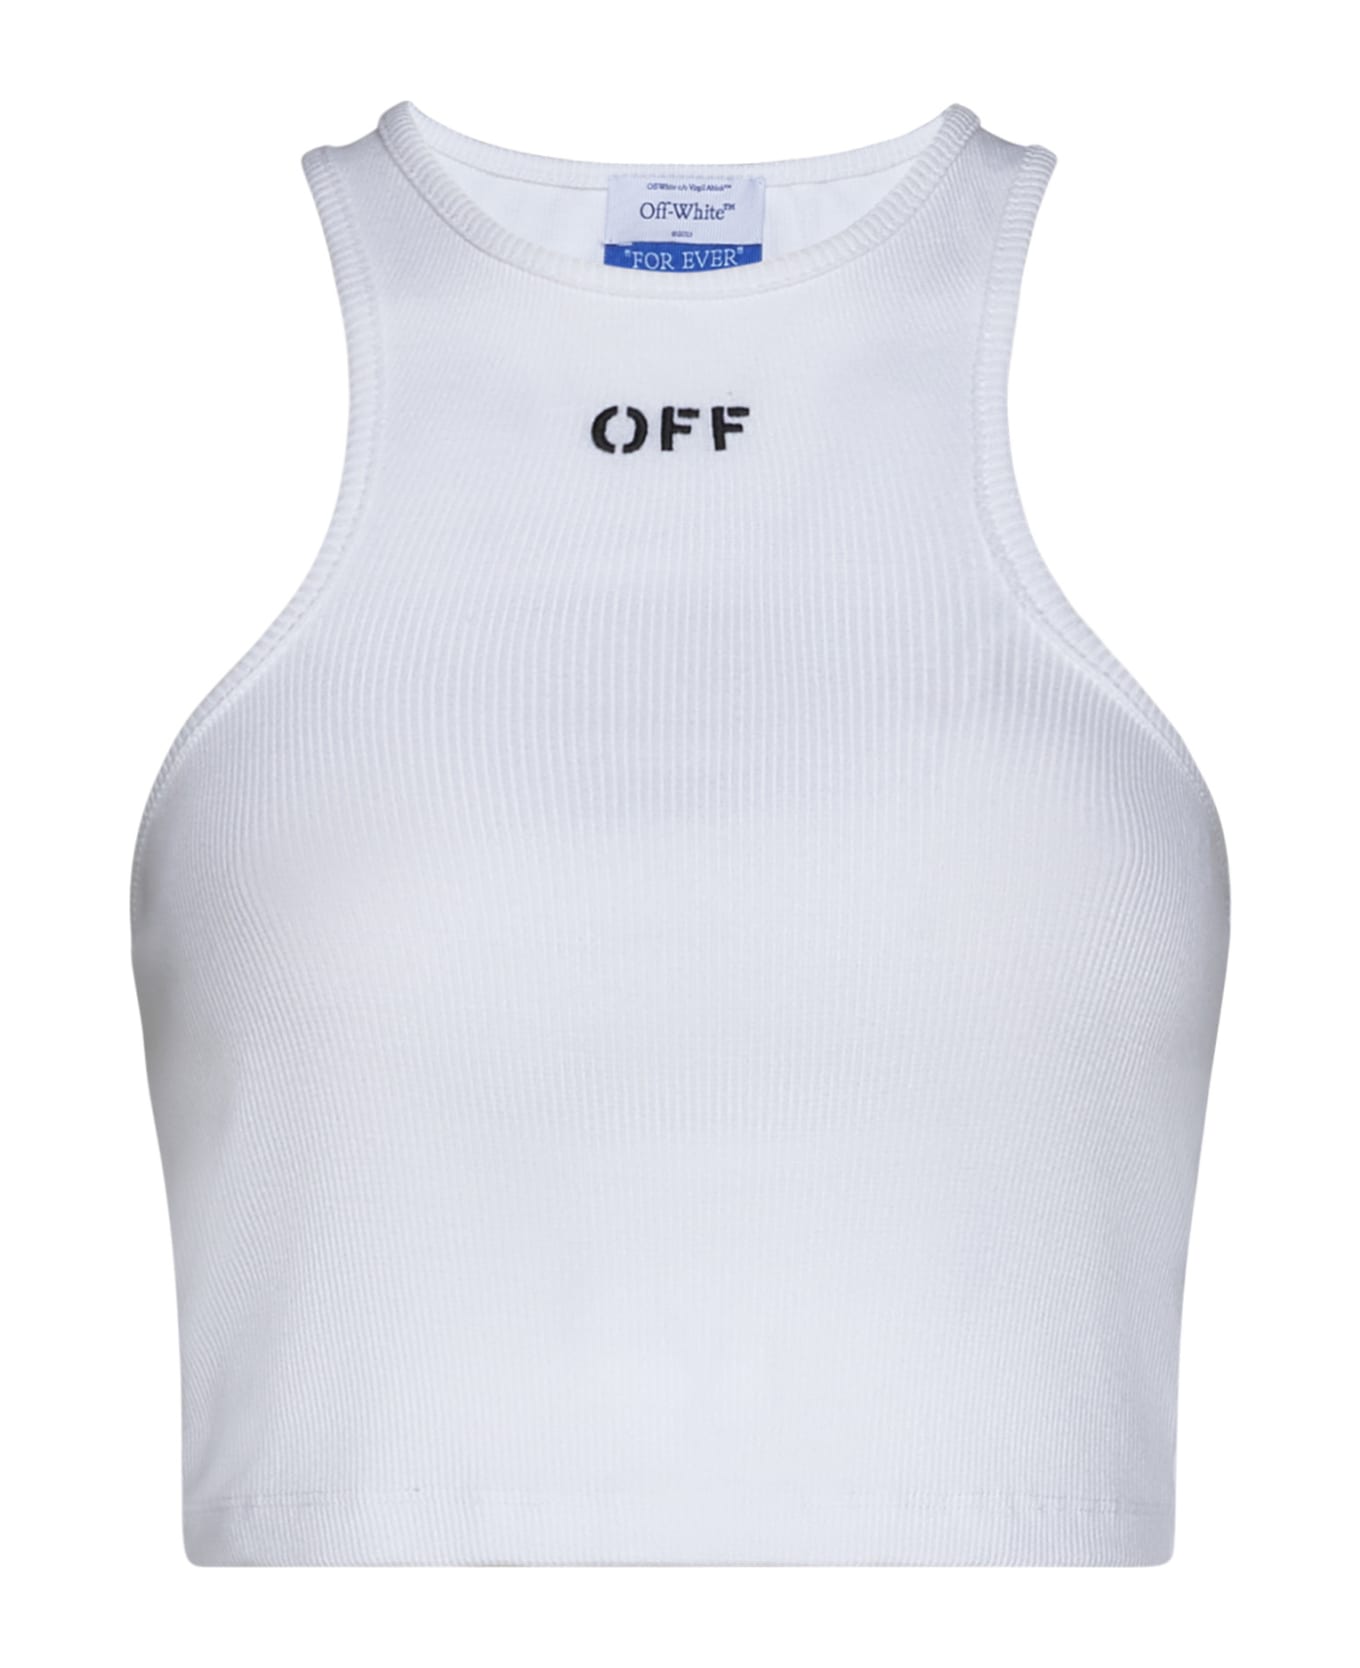 Off-White Off Stamp Rib Rowing Top - White タンクトップ